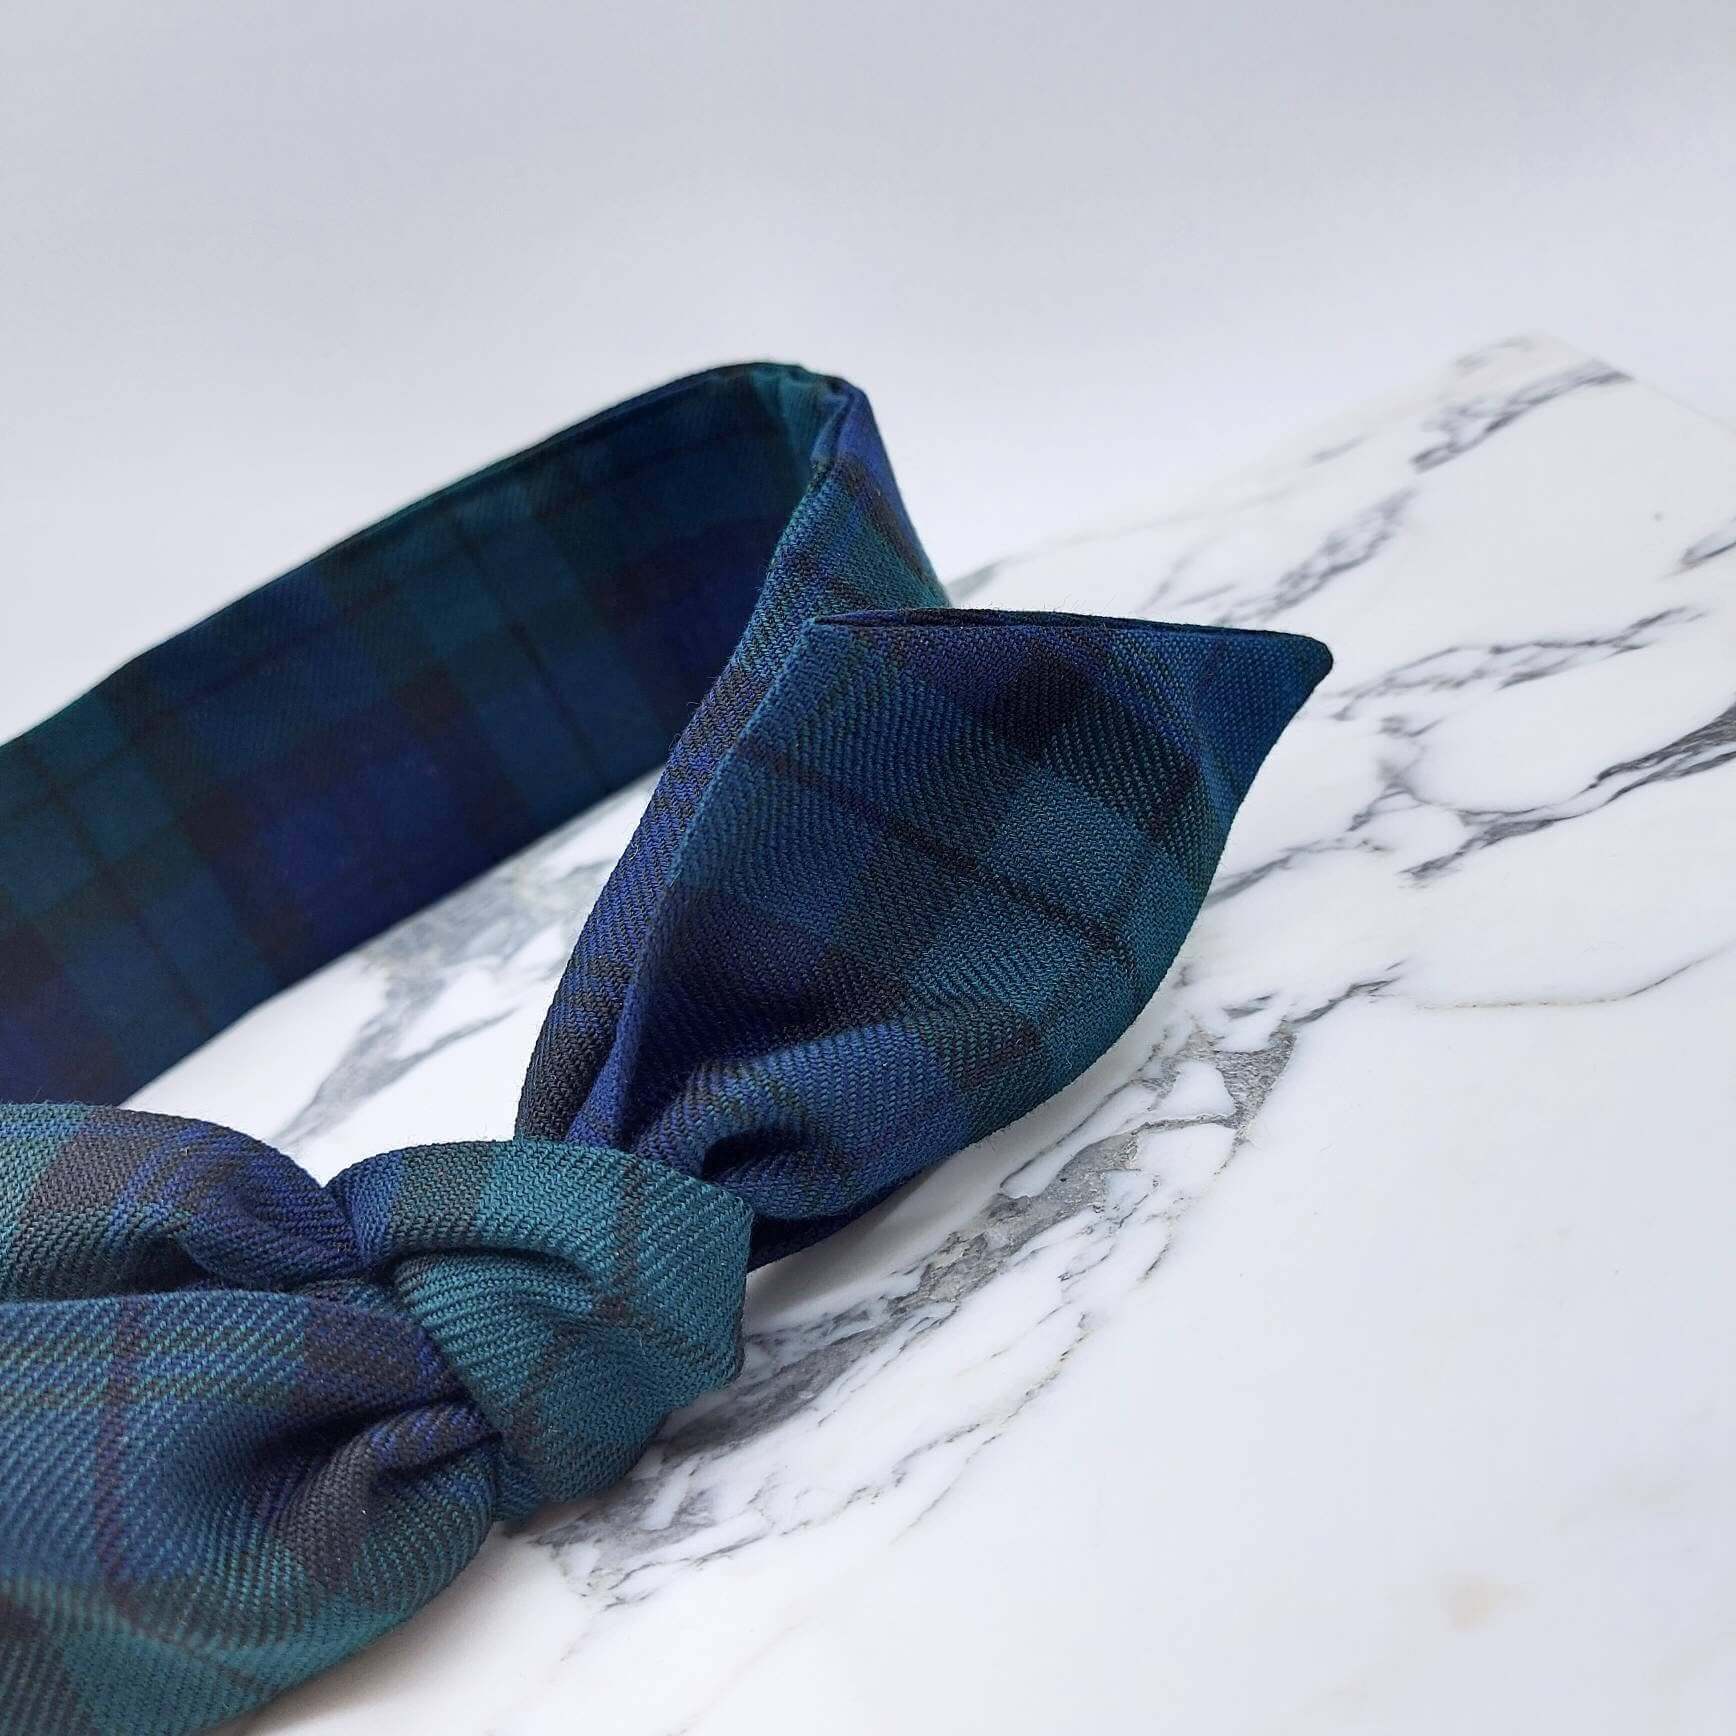 A black and navy blue tartan check fabric, tie headband, tied in a pretty knot.